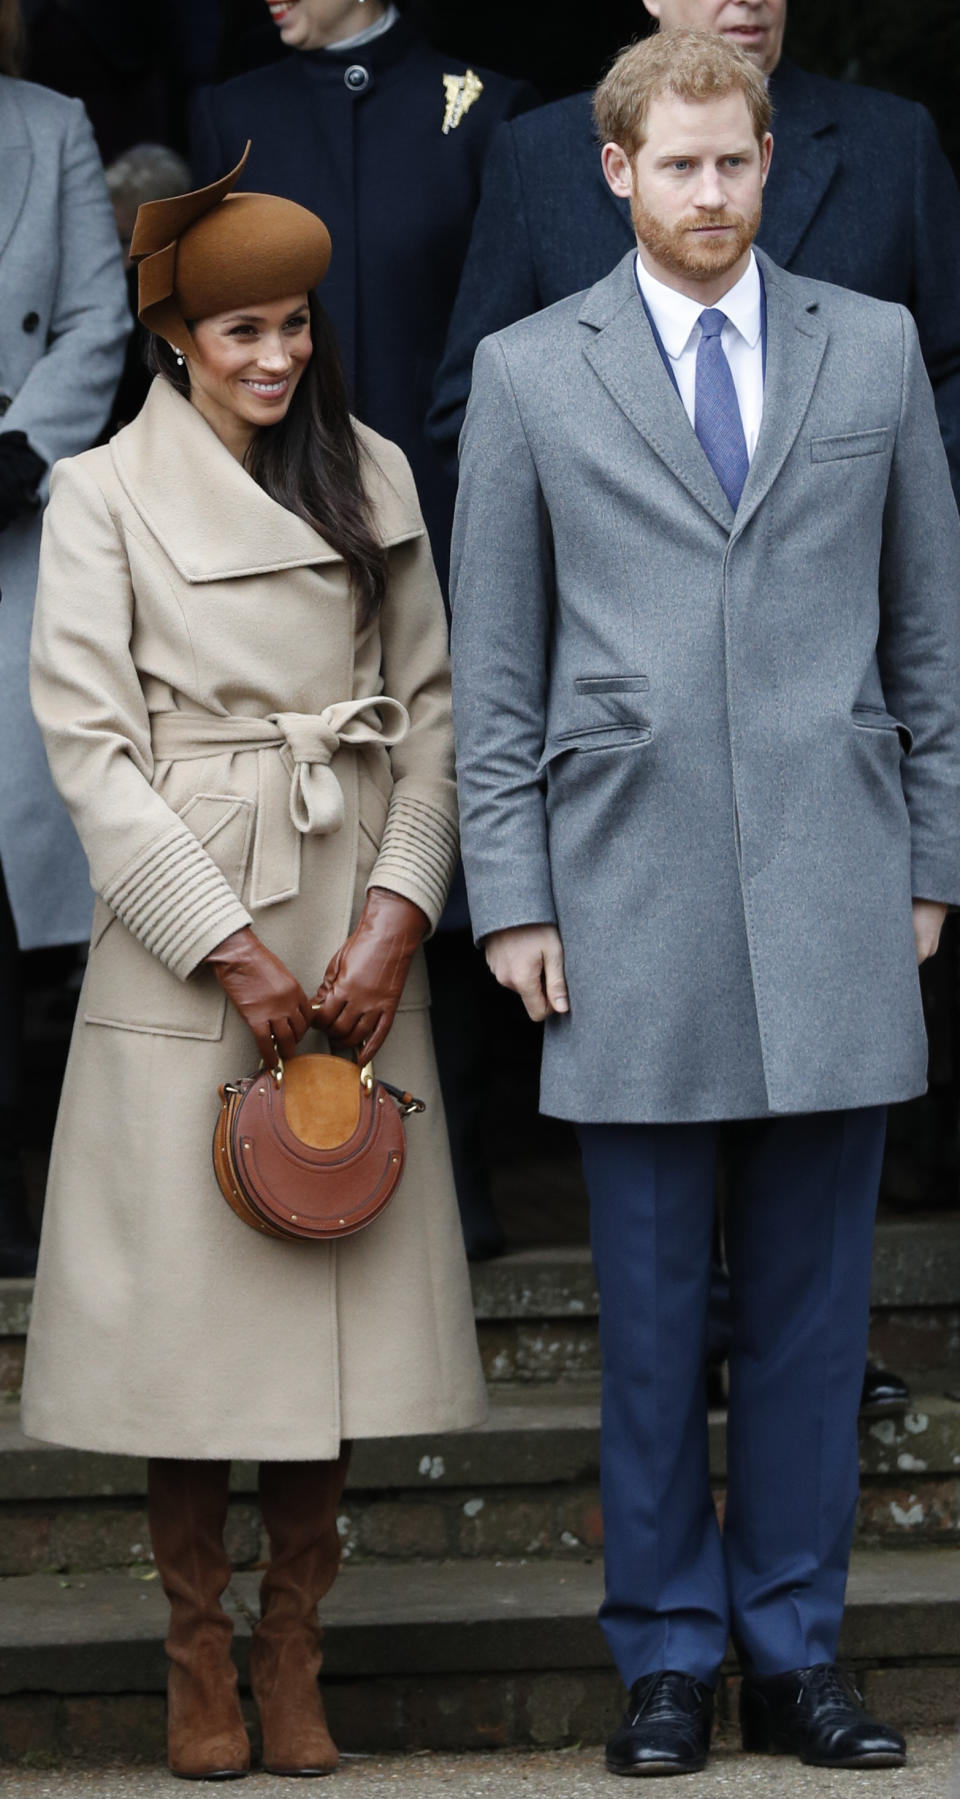 <p> For her first Christmas with the wider Royal Family at Sandringham, Meghan pulled out all the stops and attended the traditional Christmas Day service in soft shades of beige and brown. The pale beige Sentaler wrap coat boasts intricate stitch work on the cuffs and Meghan’s choice of darker brown hat, gloves and bag instantly elevates the classic look. </p>